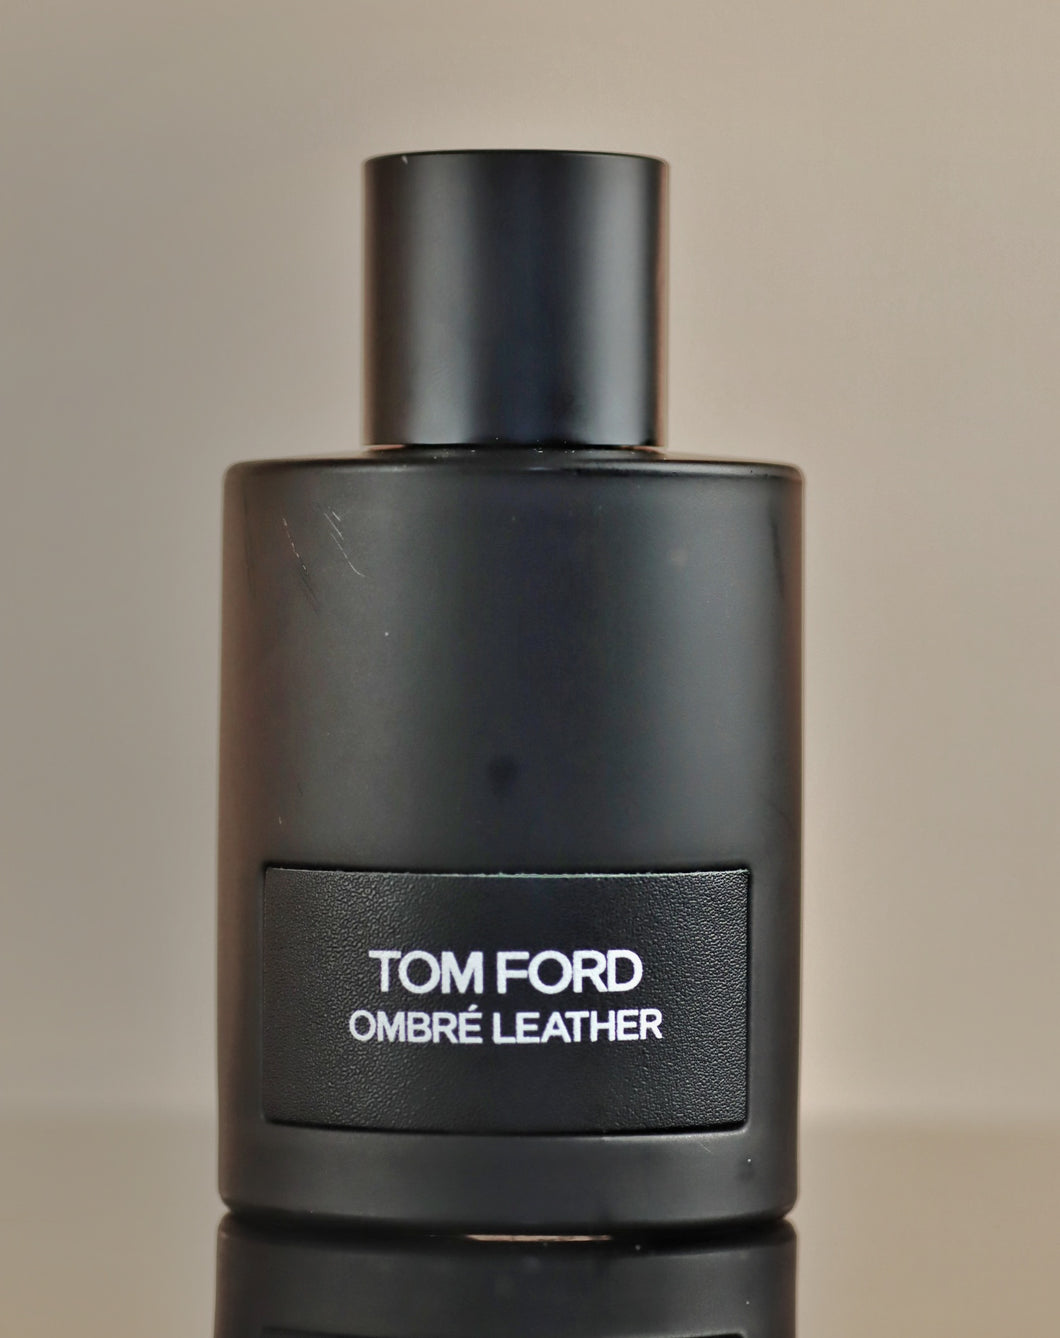 Tom Ford Ombre Leather, Fragrance Sample